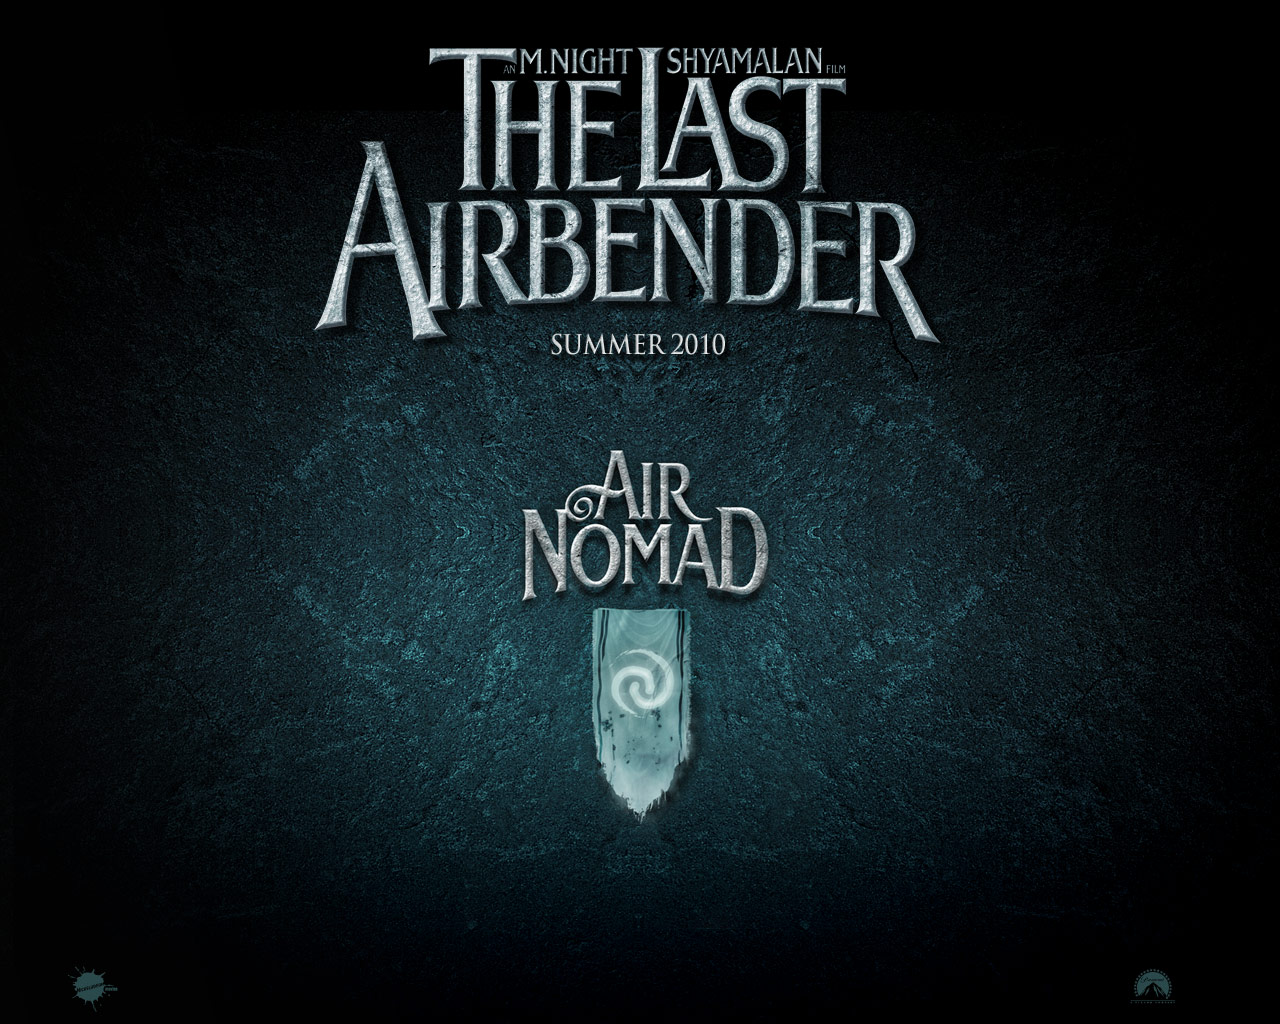 Download HQ Air Nomad The Last Airbender wallpaper / 1280x1024